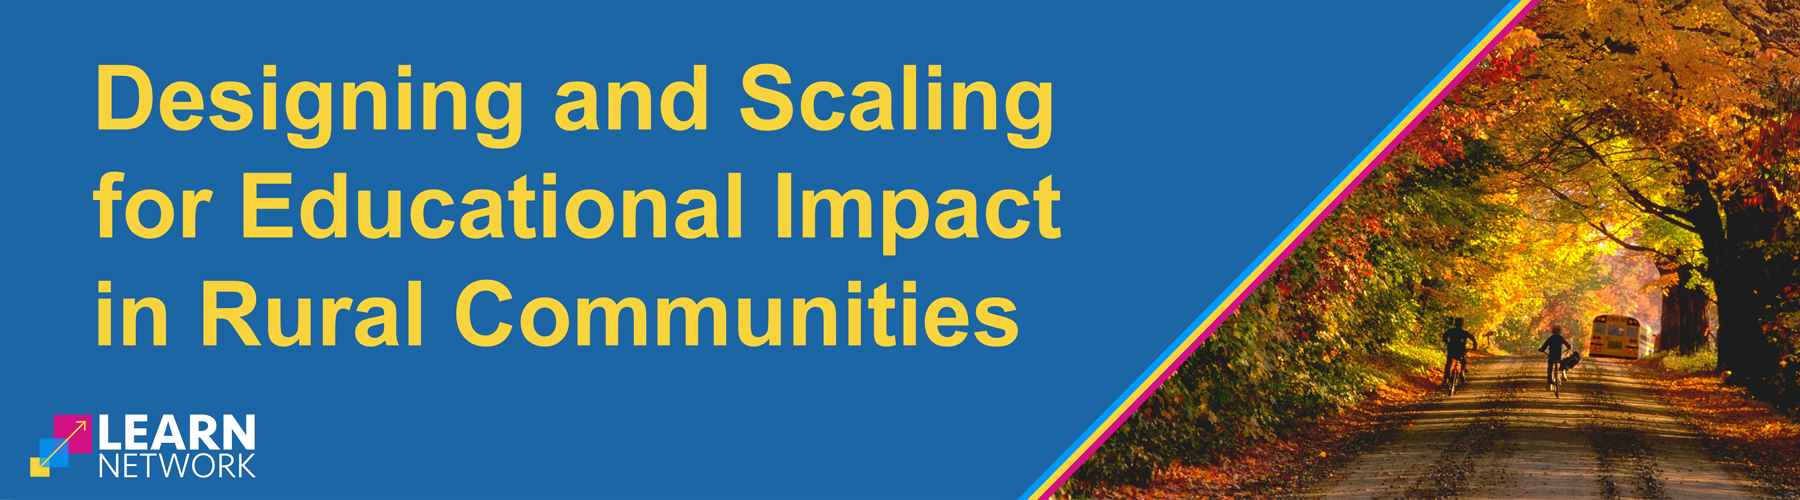 A banner that reads "Designing and Scaling for Educational Impact in Rural Communities"